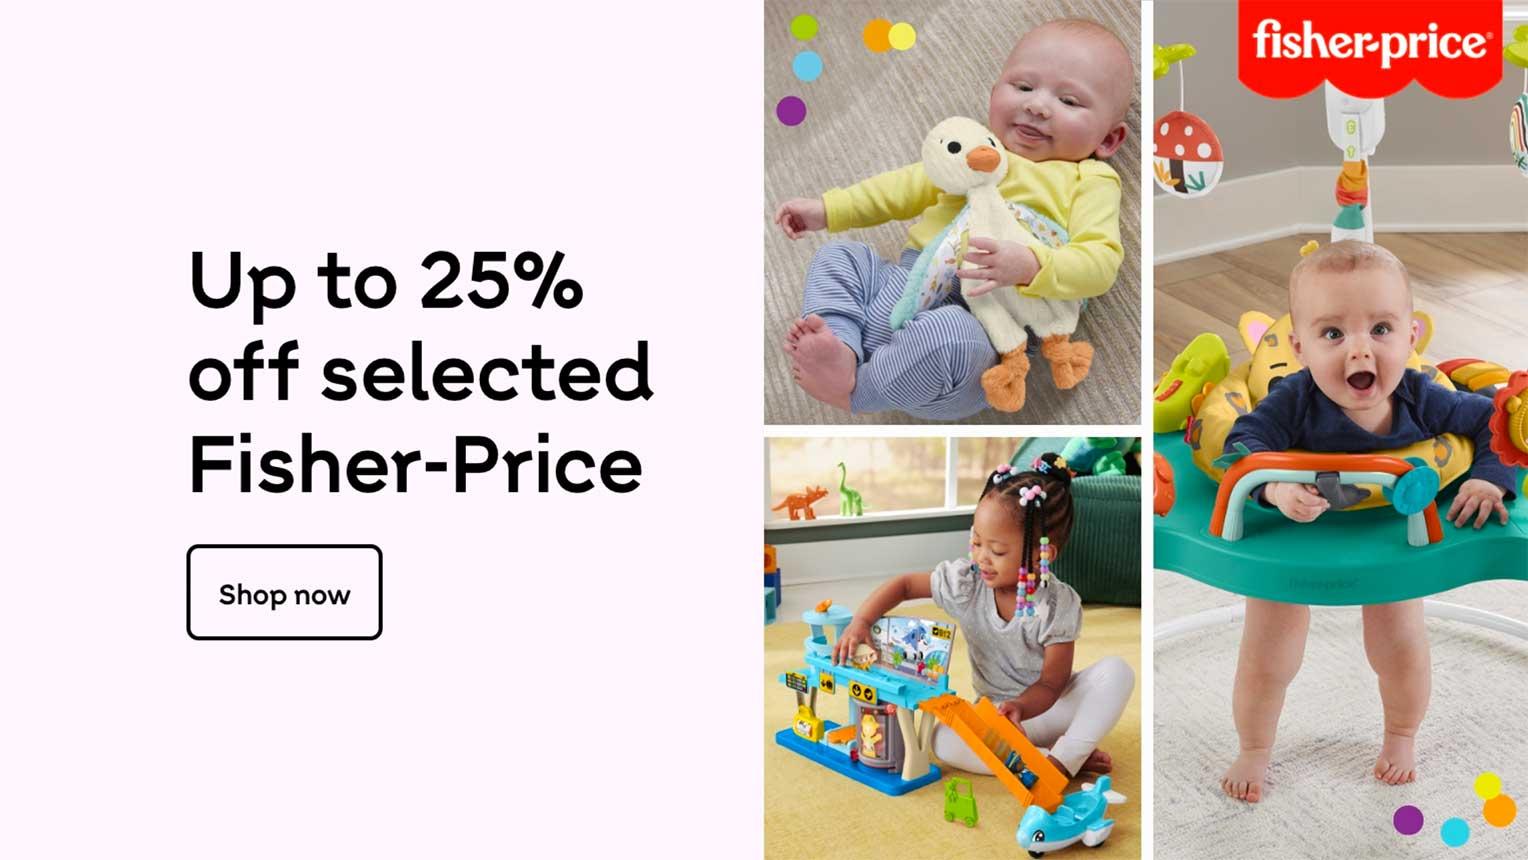 Up to 25% off selected Fisher-Price. Shop now.